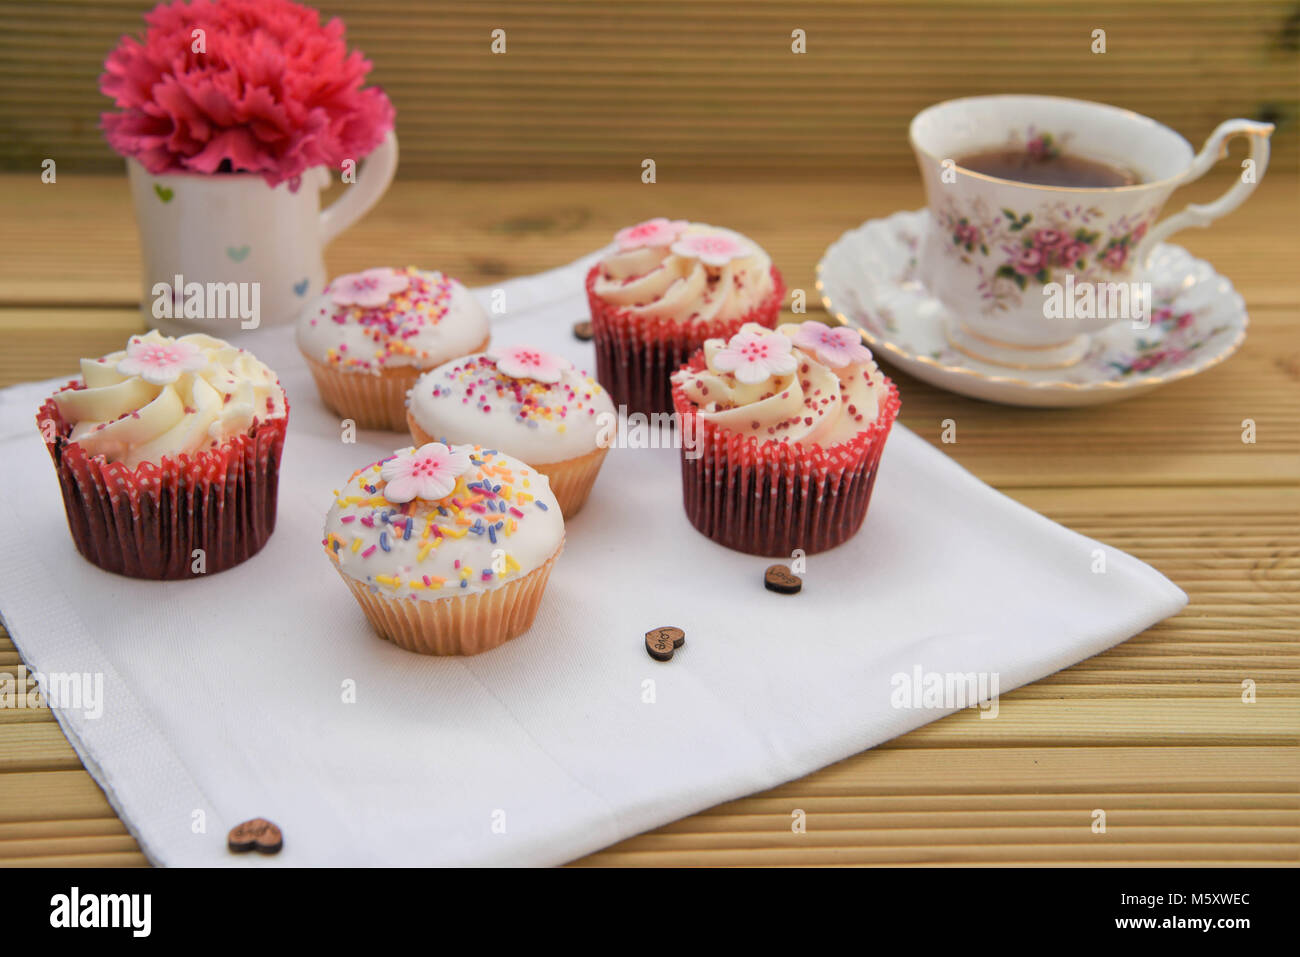 delicious home made food of little cakes and cup of tea with flowers Stock Photo